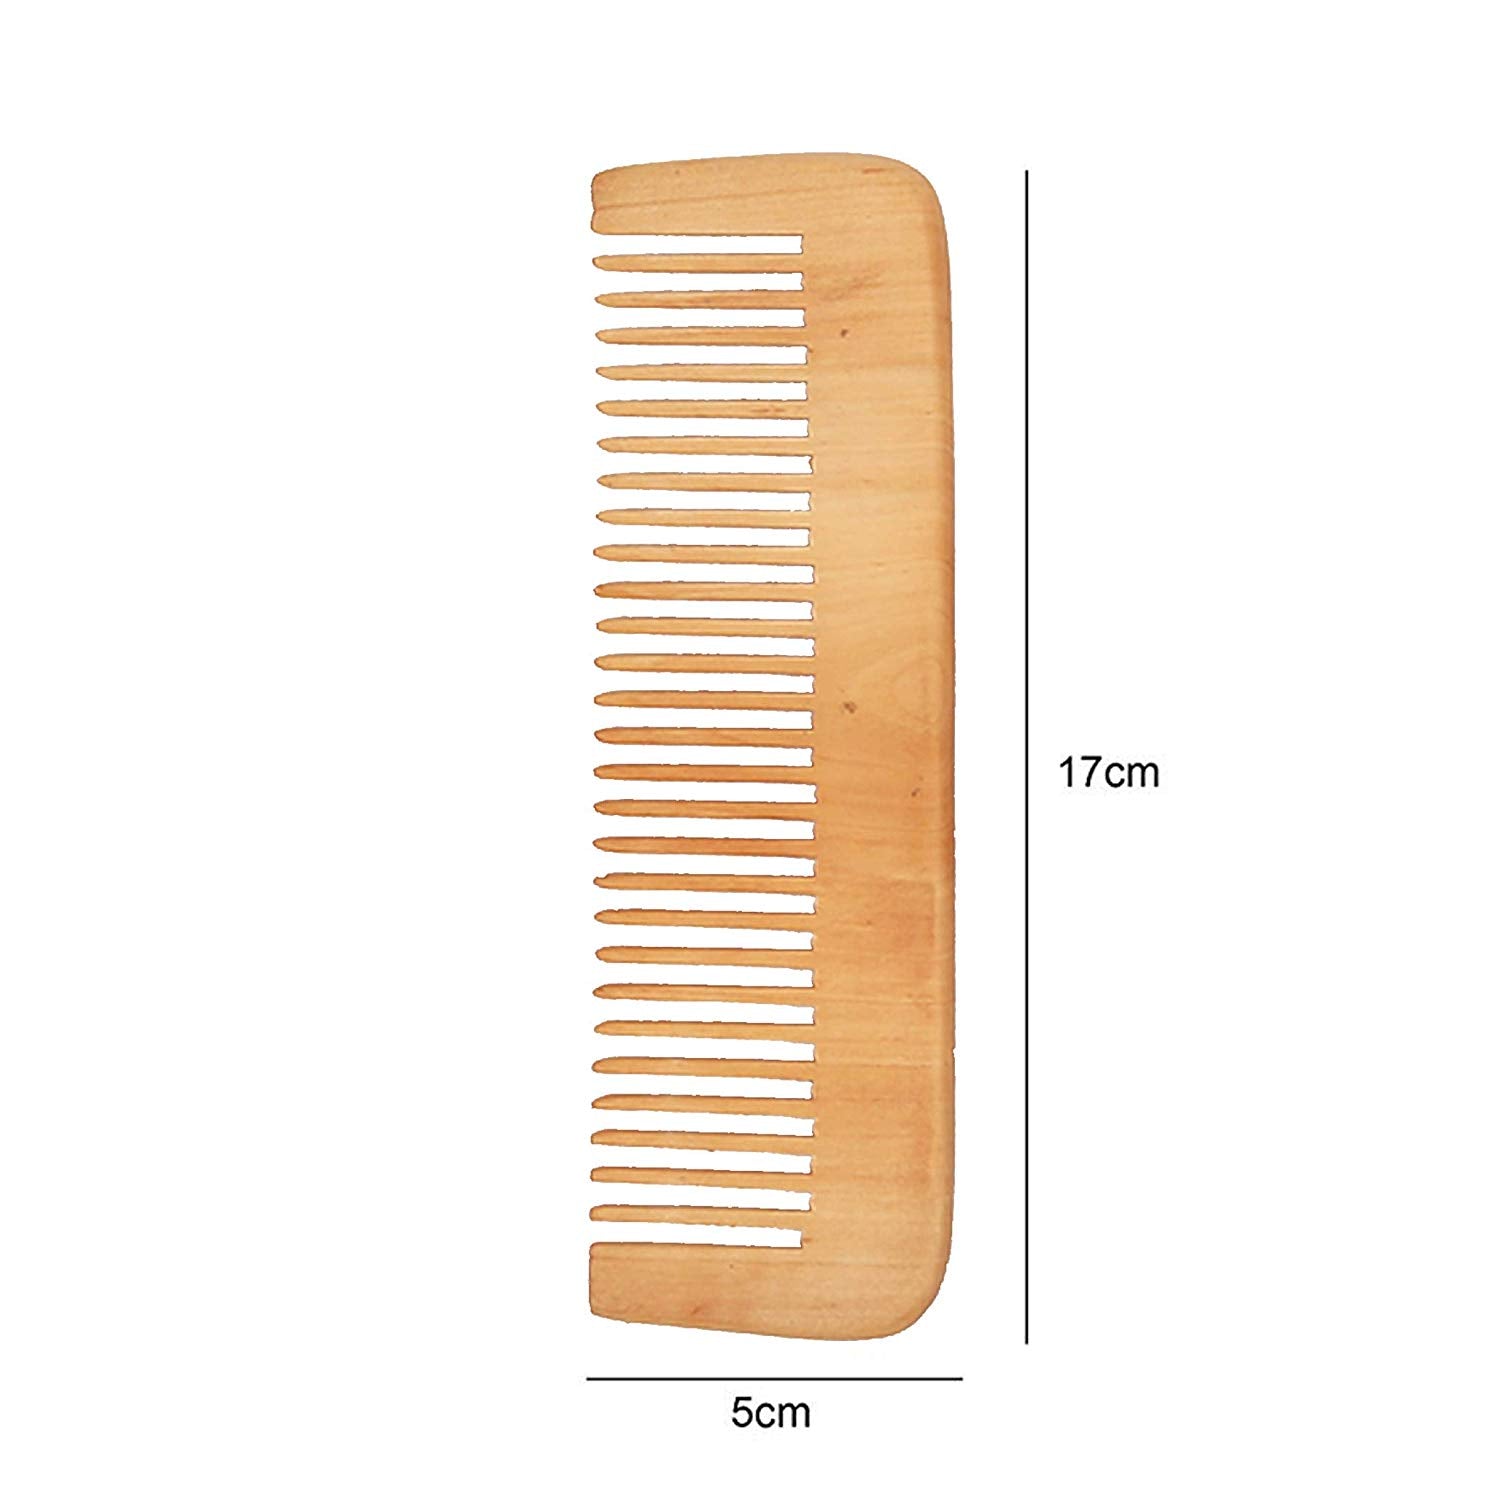 DAISYLIFE Natural and Eco-friendly beech wood combs for healthy hair and scalp